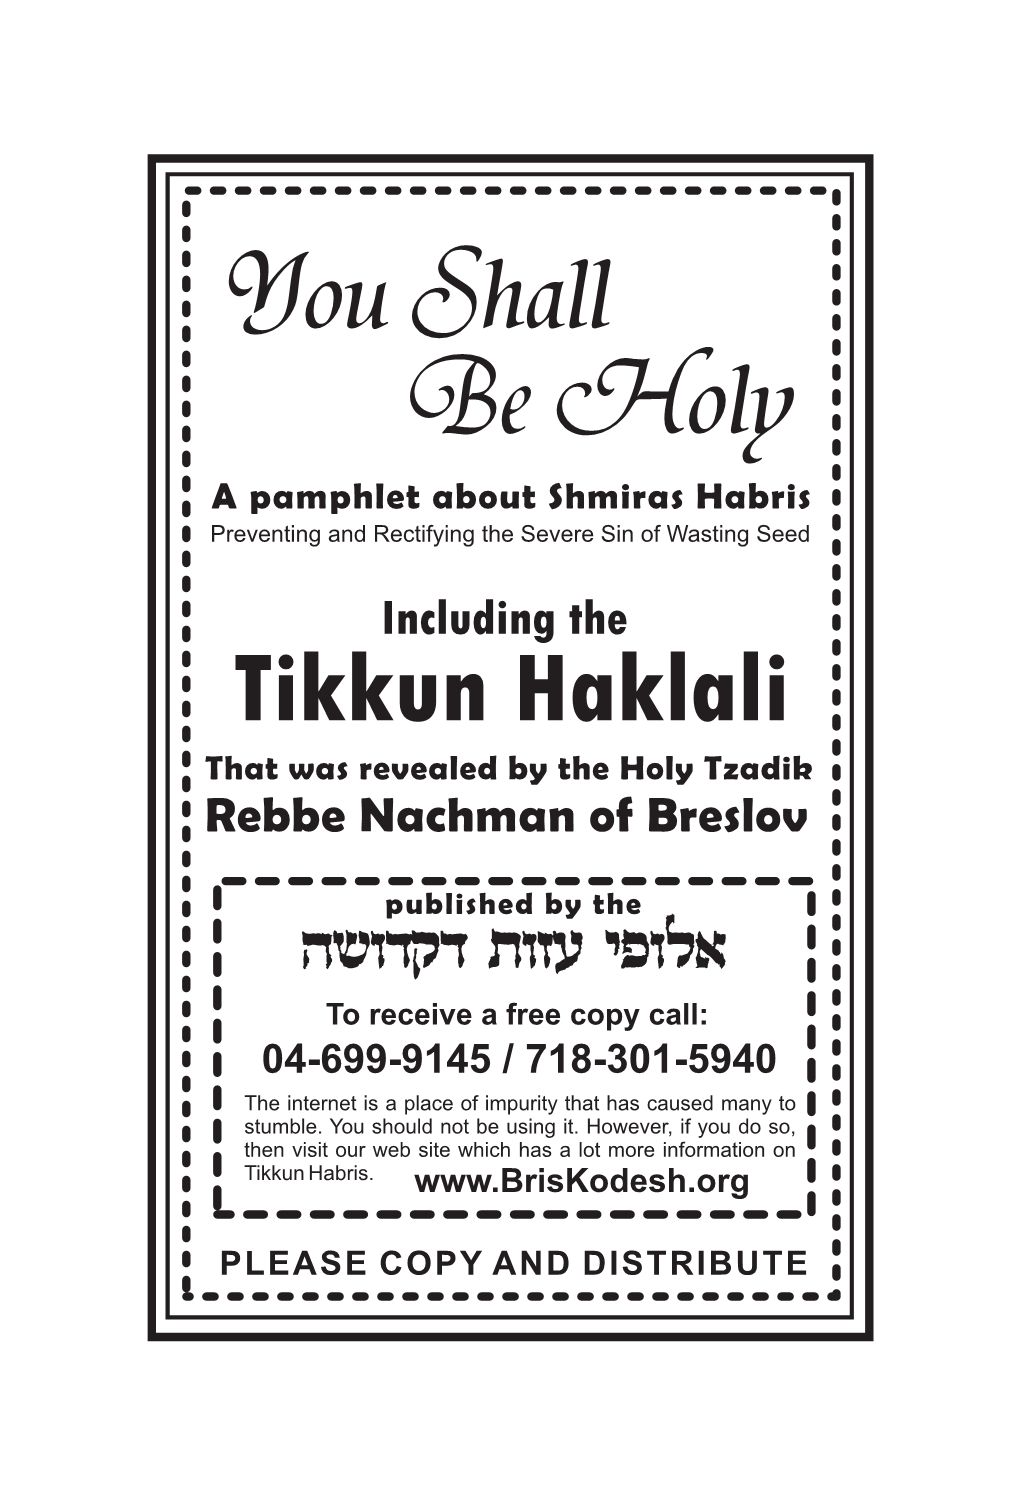 Tikkun Haklali the Earlier Books of Kabbalah Bring Down Many Tikkunim That Must Be Done to Fix the Damage Caused by This Sin